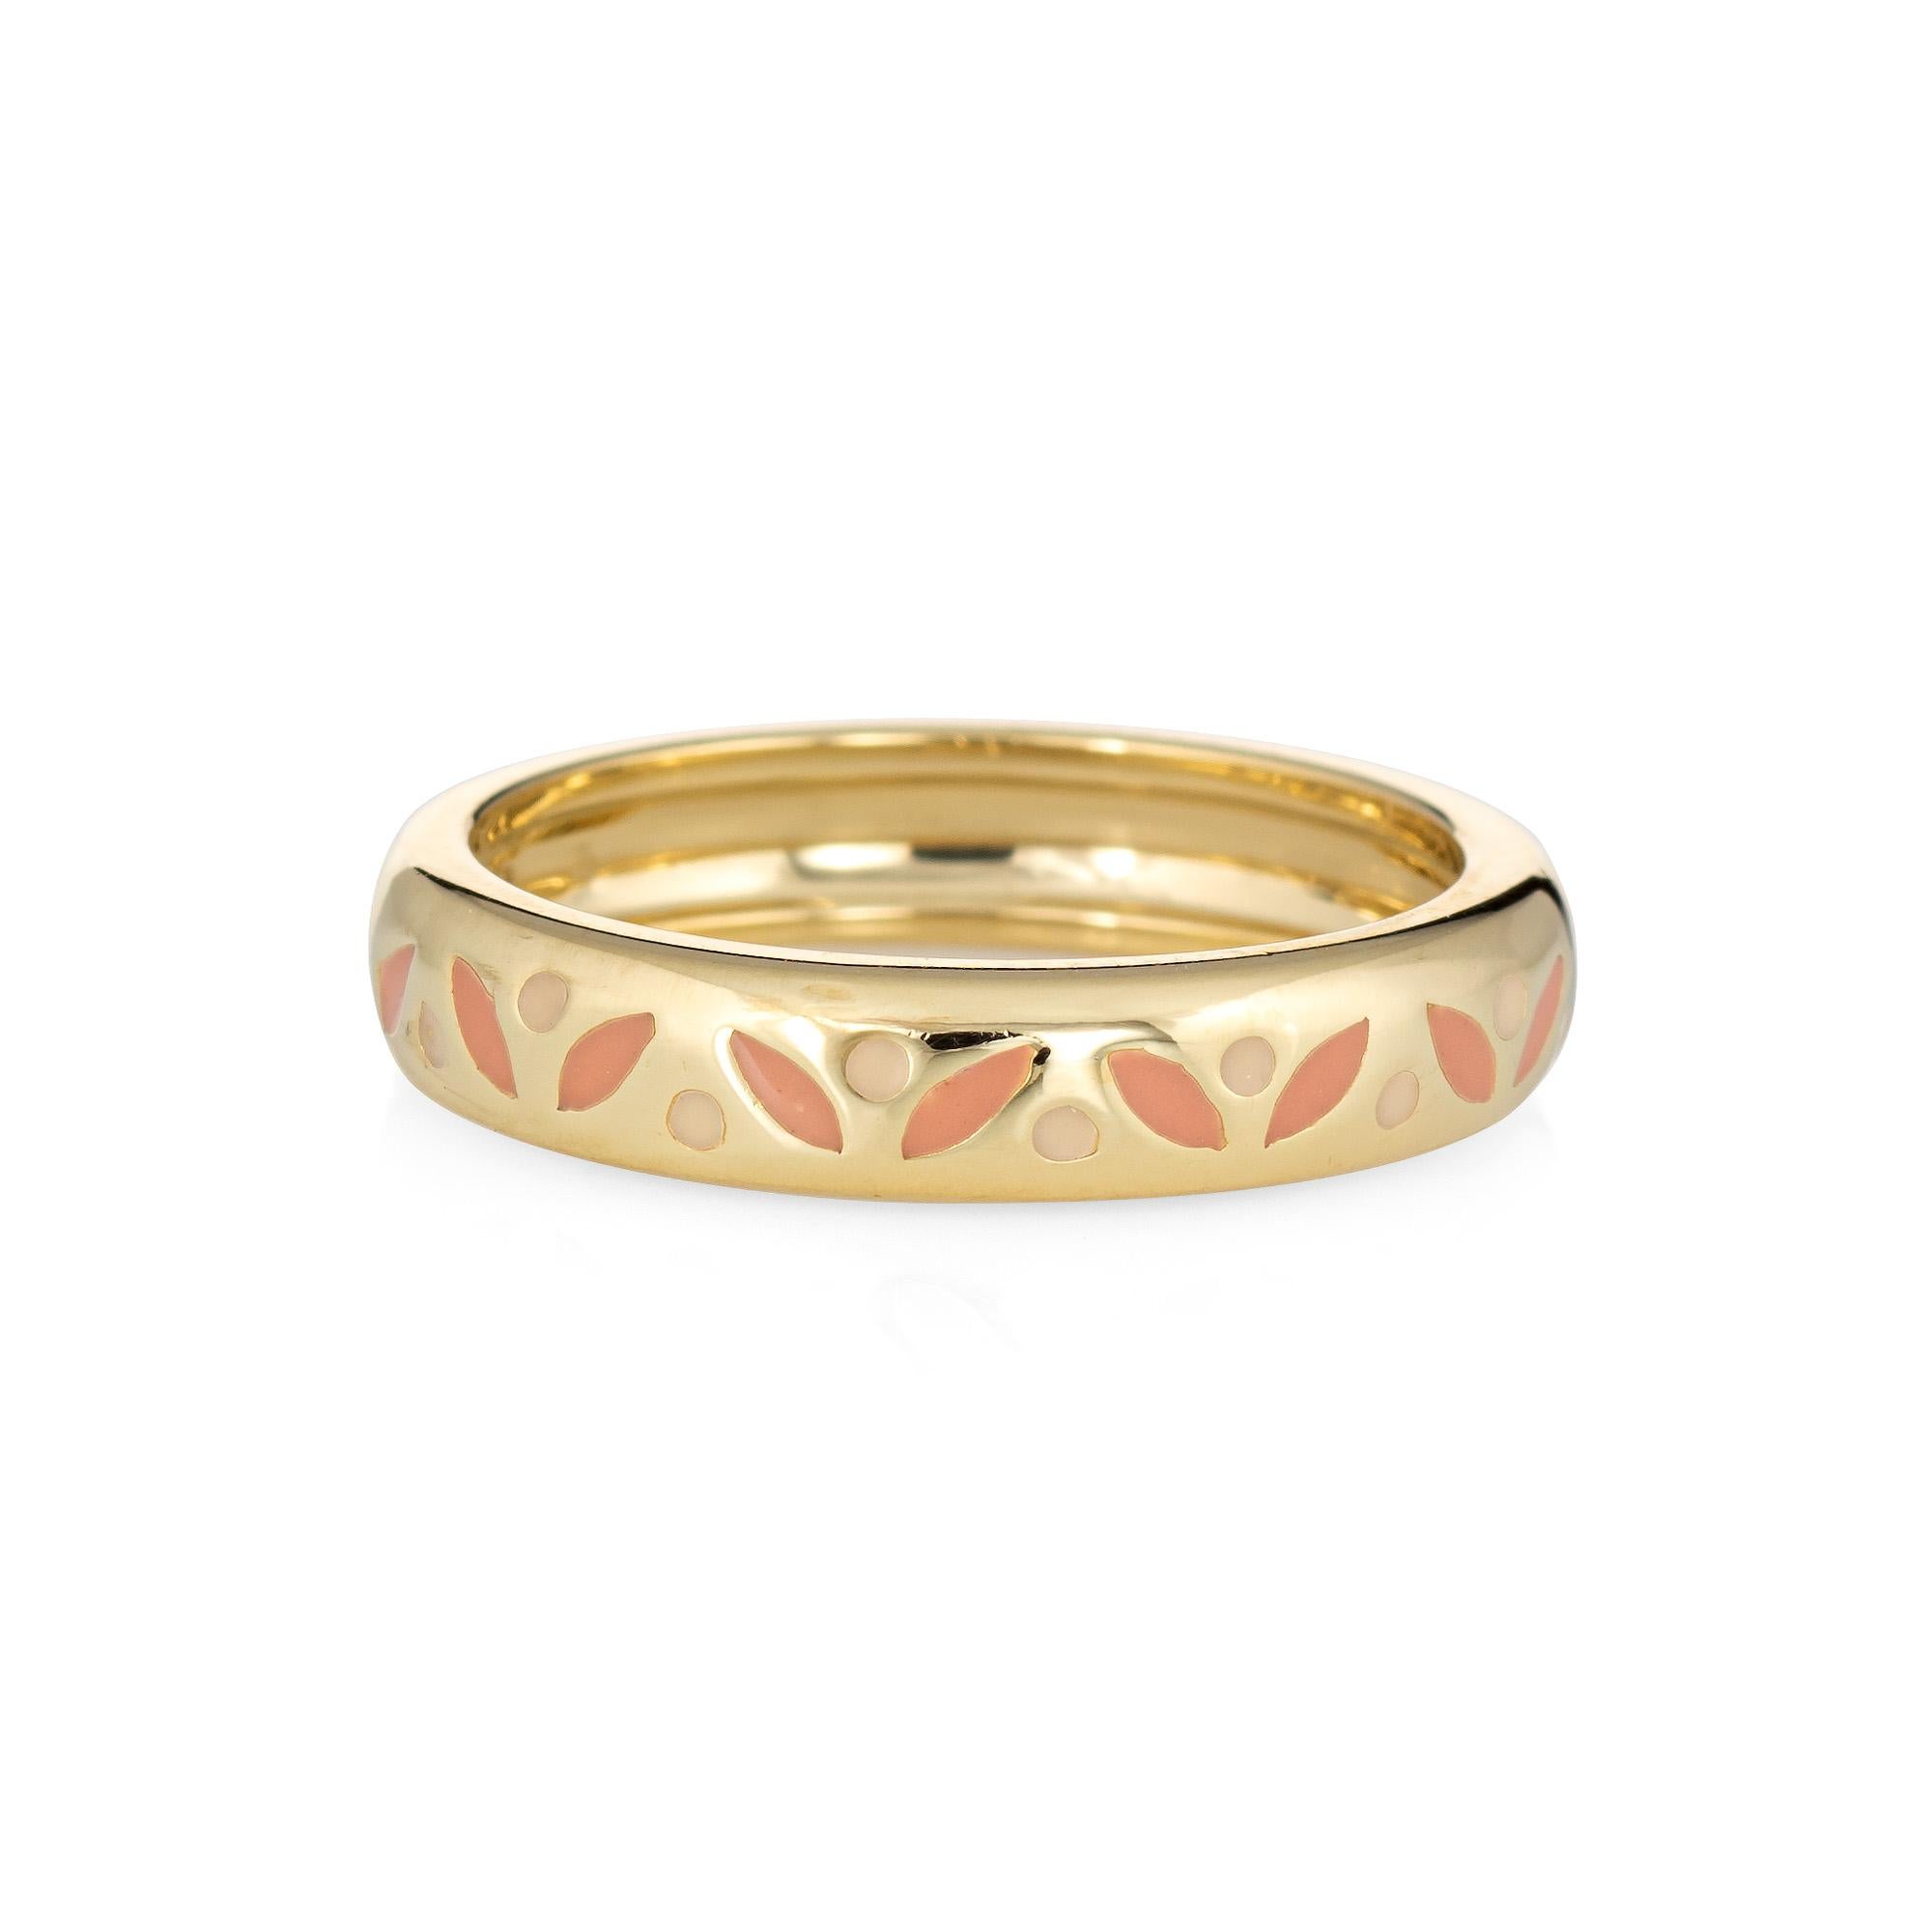 Finely detailed Hidalgo enamel ring crafted in 18 karat yellow gold. 

The band features an alternating pattern of round and marquise shapes rendered in crème and peach-pink enamel.

The ring is in very good condition. 

Particulars:

Weight: 5